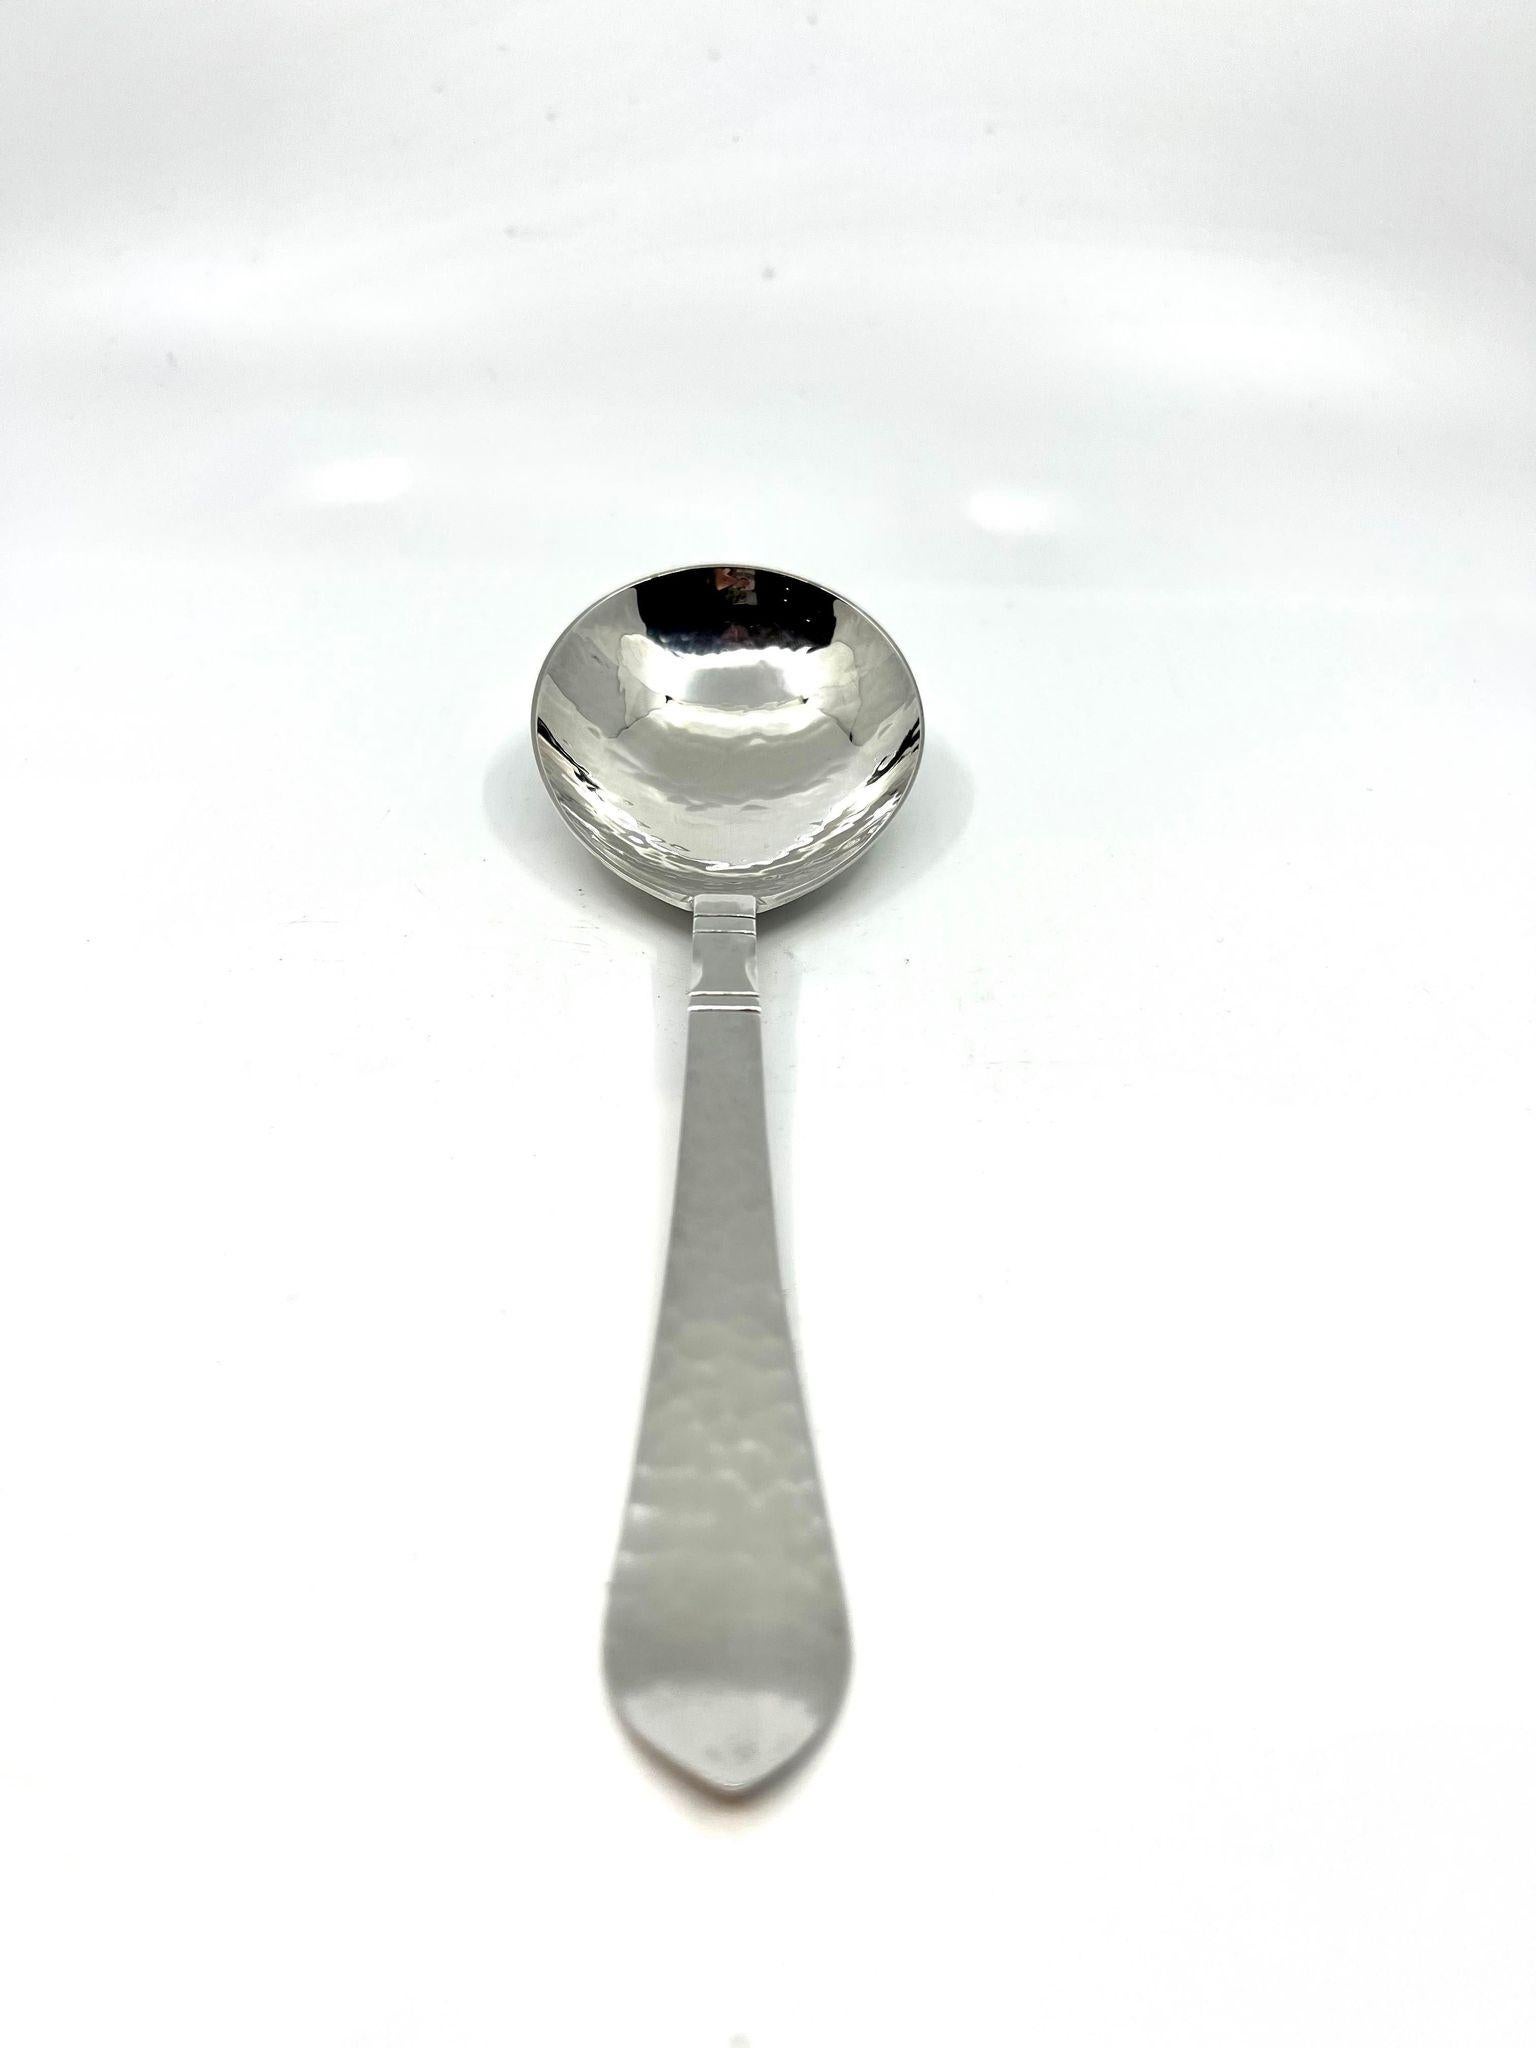 A sterling silver Georg Jensen medium serving spoon, item #113 in the Continental pattern, design #4 by Georg Jensen from 1906.

Additional information:
Material: Sterling Silver
Style: Art Nouveau
Hallmarks: With Georg Jensen hallmark, made in